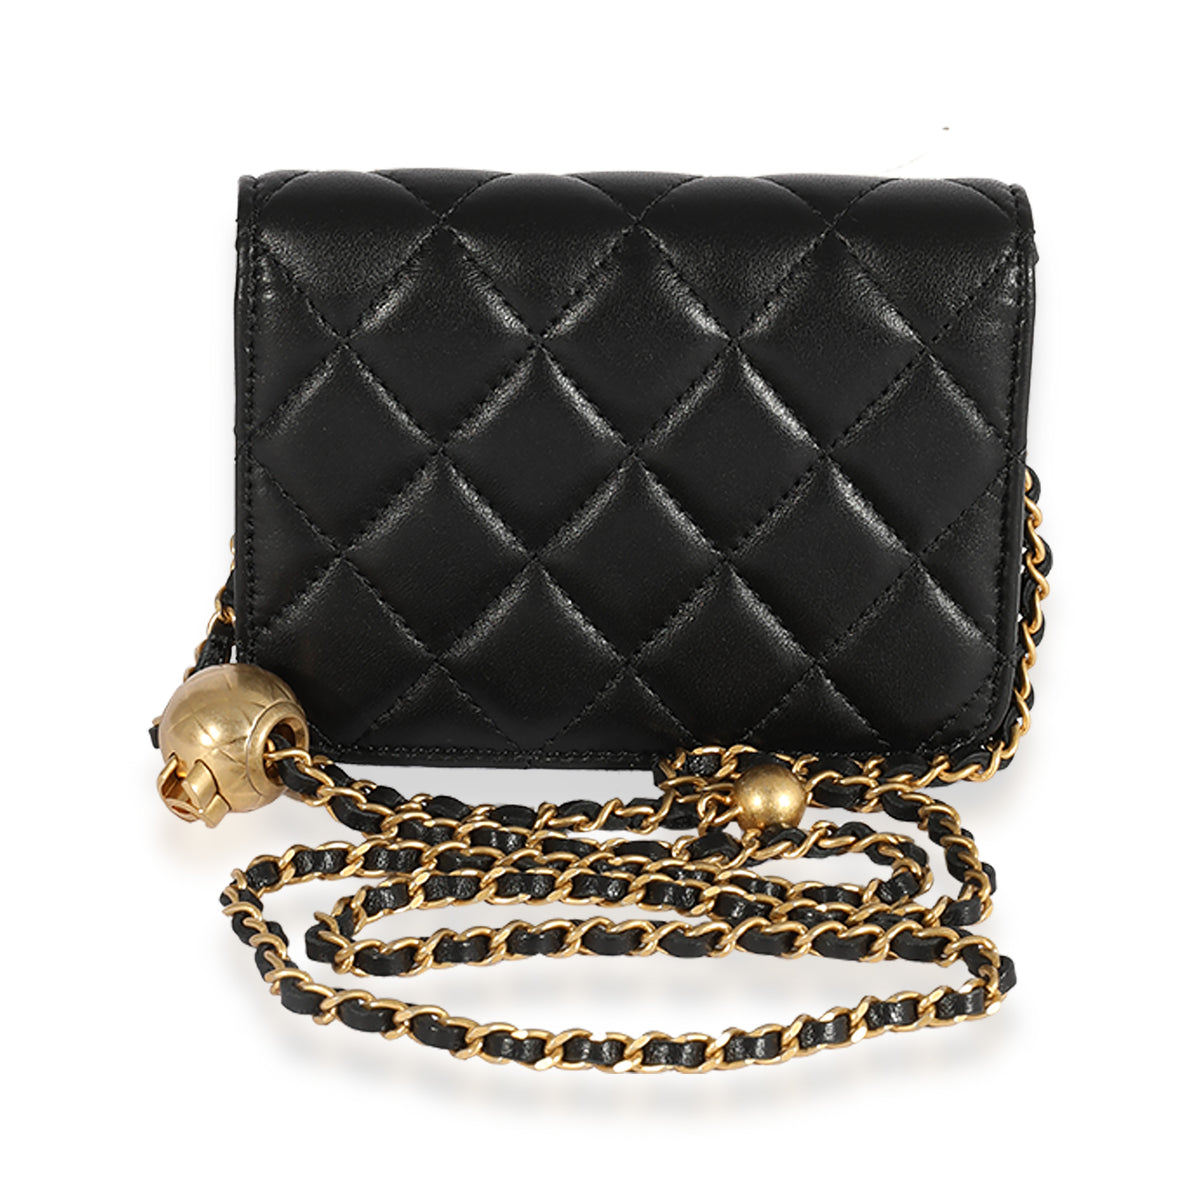 Chanel Black Quilted Lambskin Pearl Crush Clutch With Chain